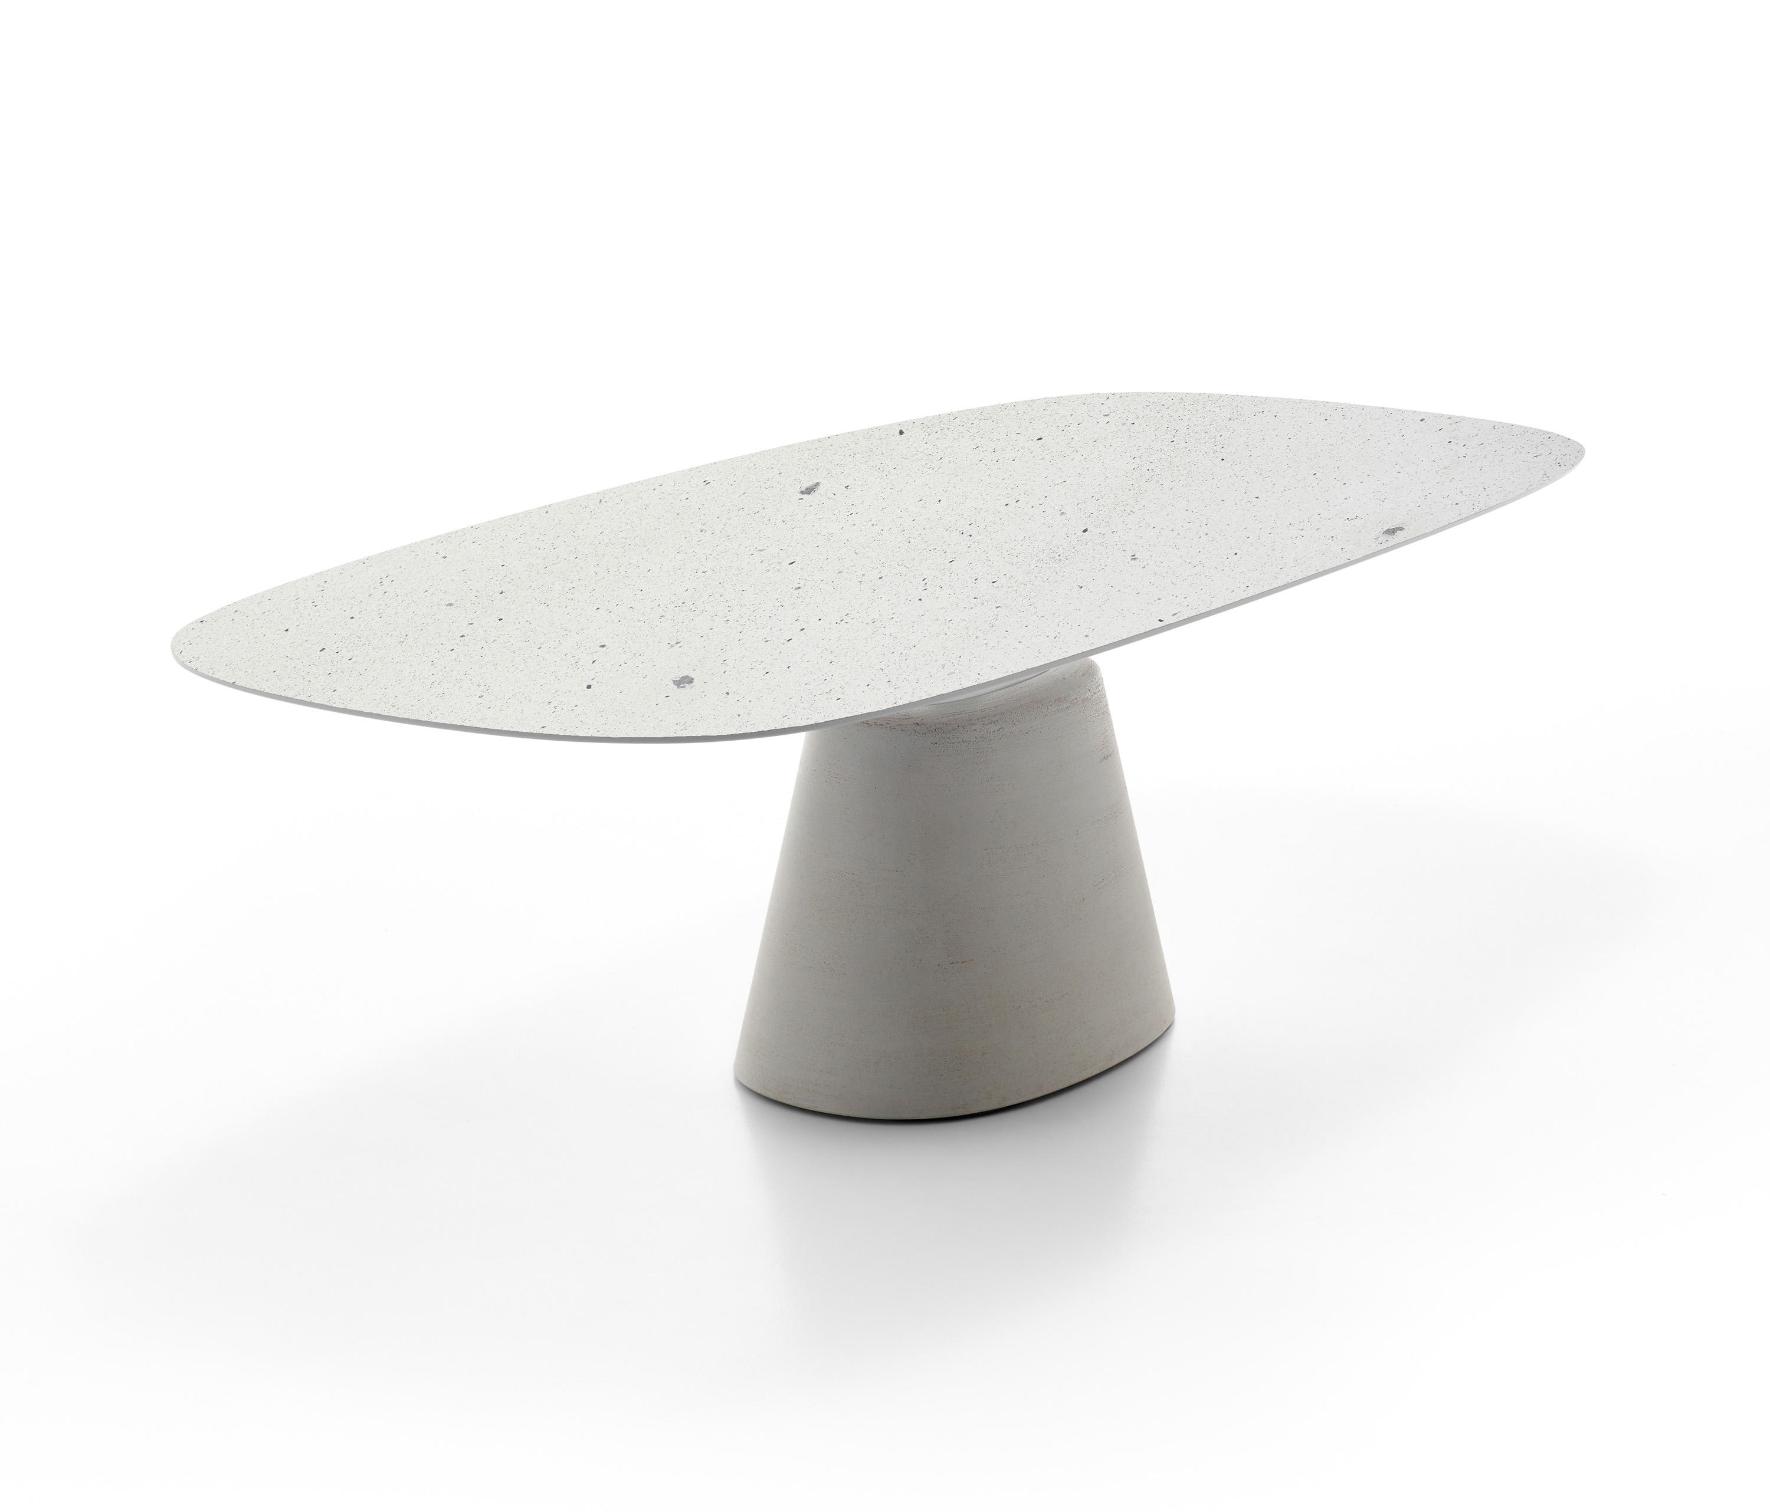 Rock Maxi Italian Indoor / Outdoor Table ☞ Structure: Cement Natural X080 ☞ Top: Matt Lacquered - White X042 ☞ Dimensions: 105 x 210 cm